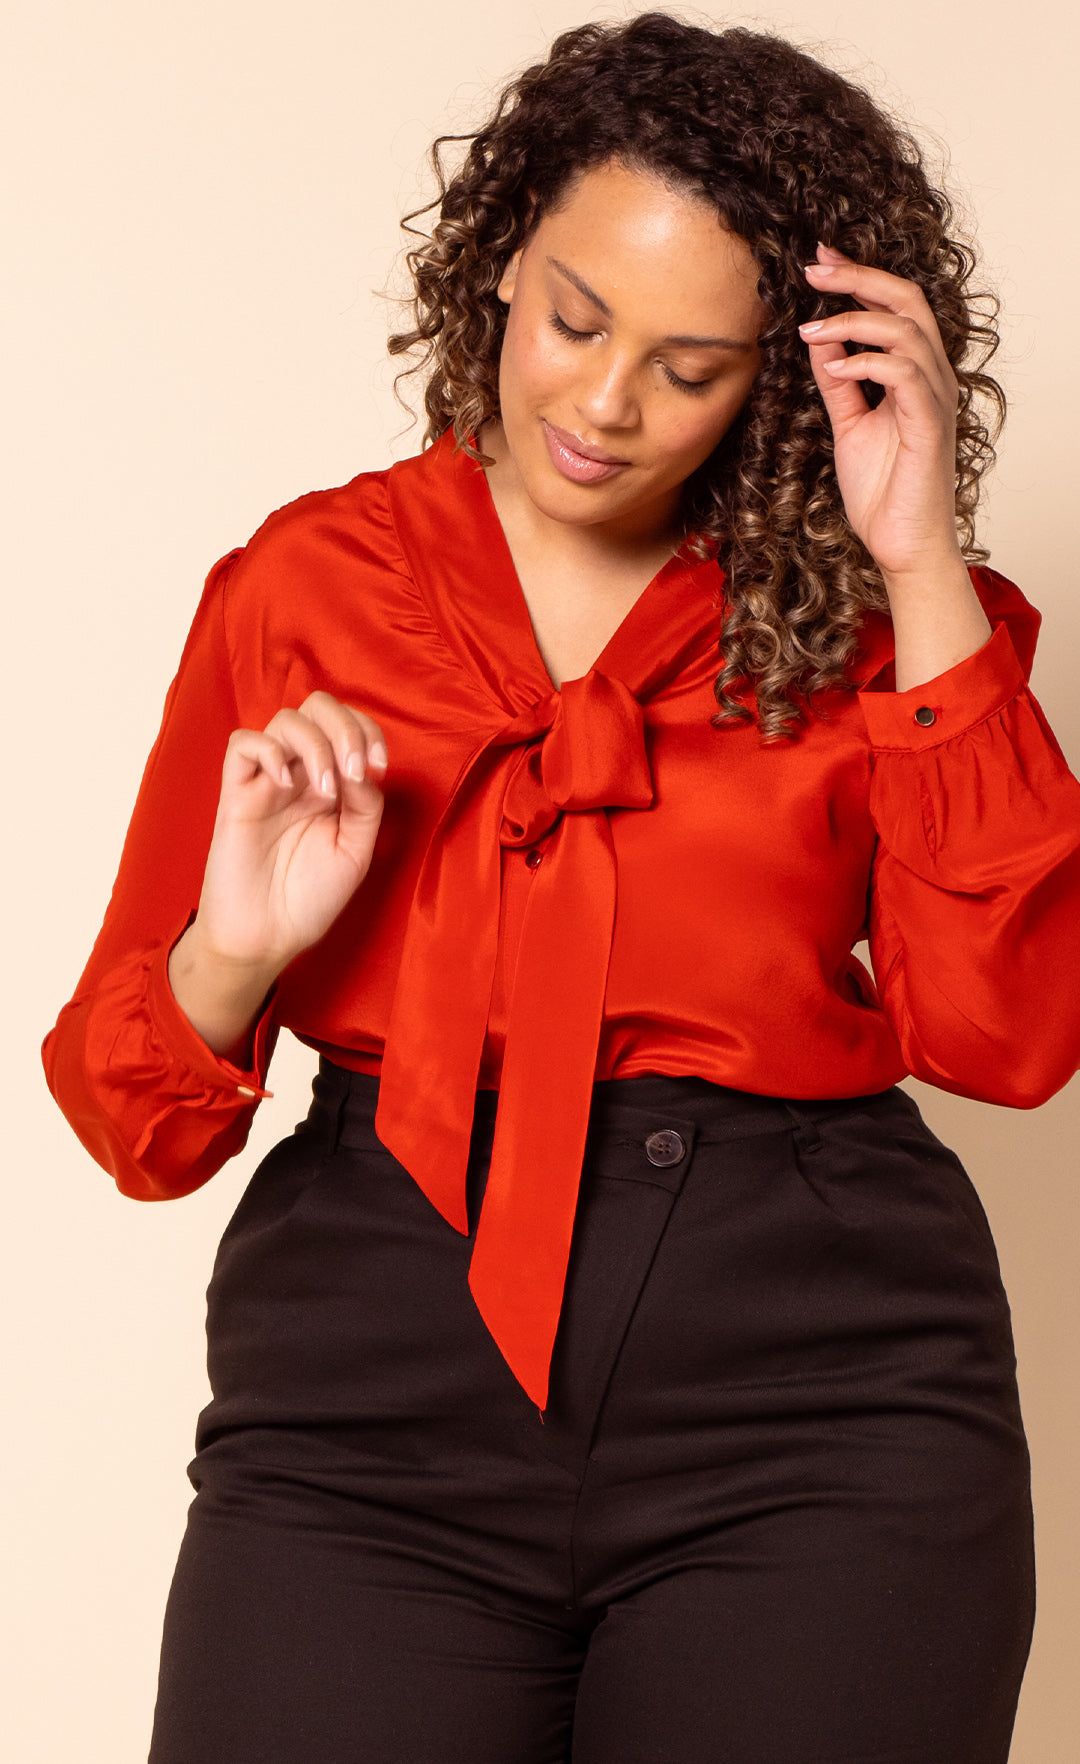 The Liz Top - Pink Martini Collection